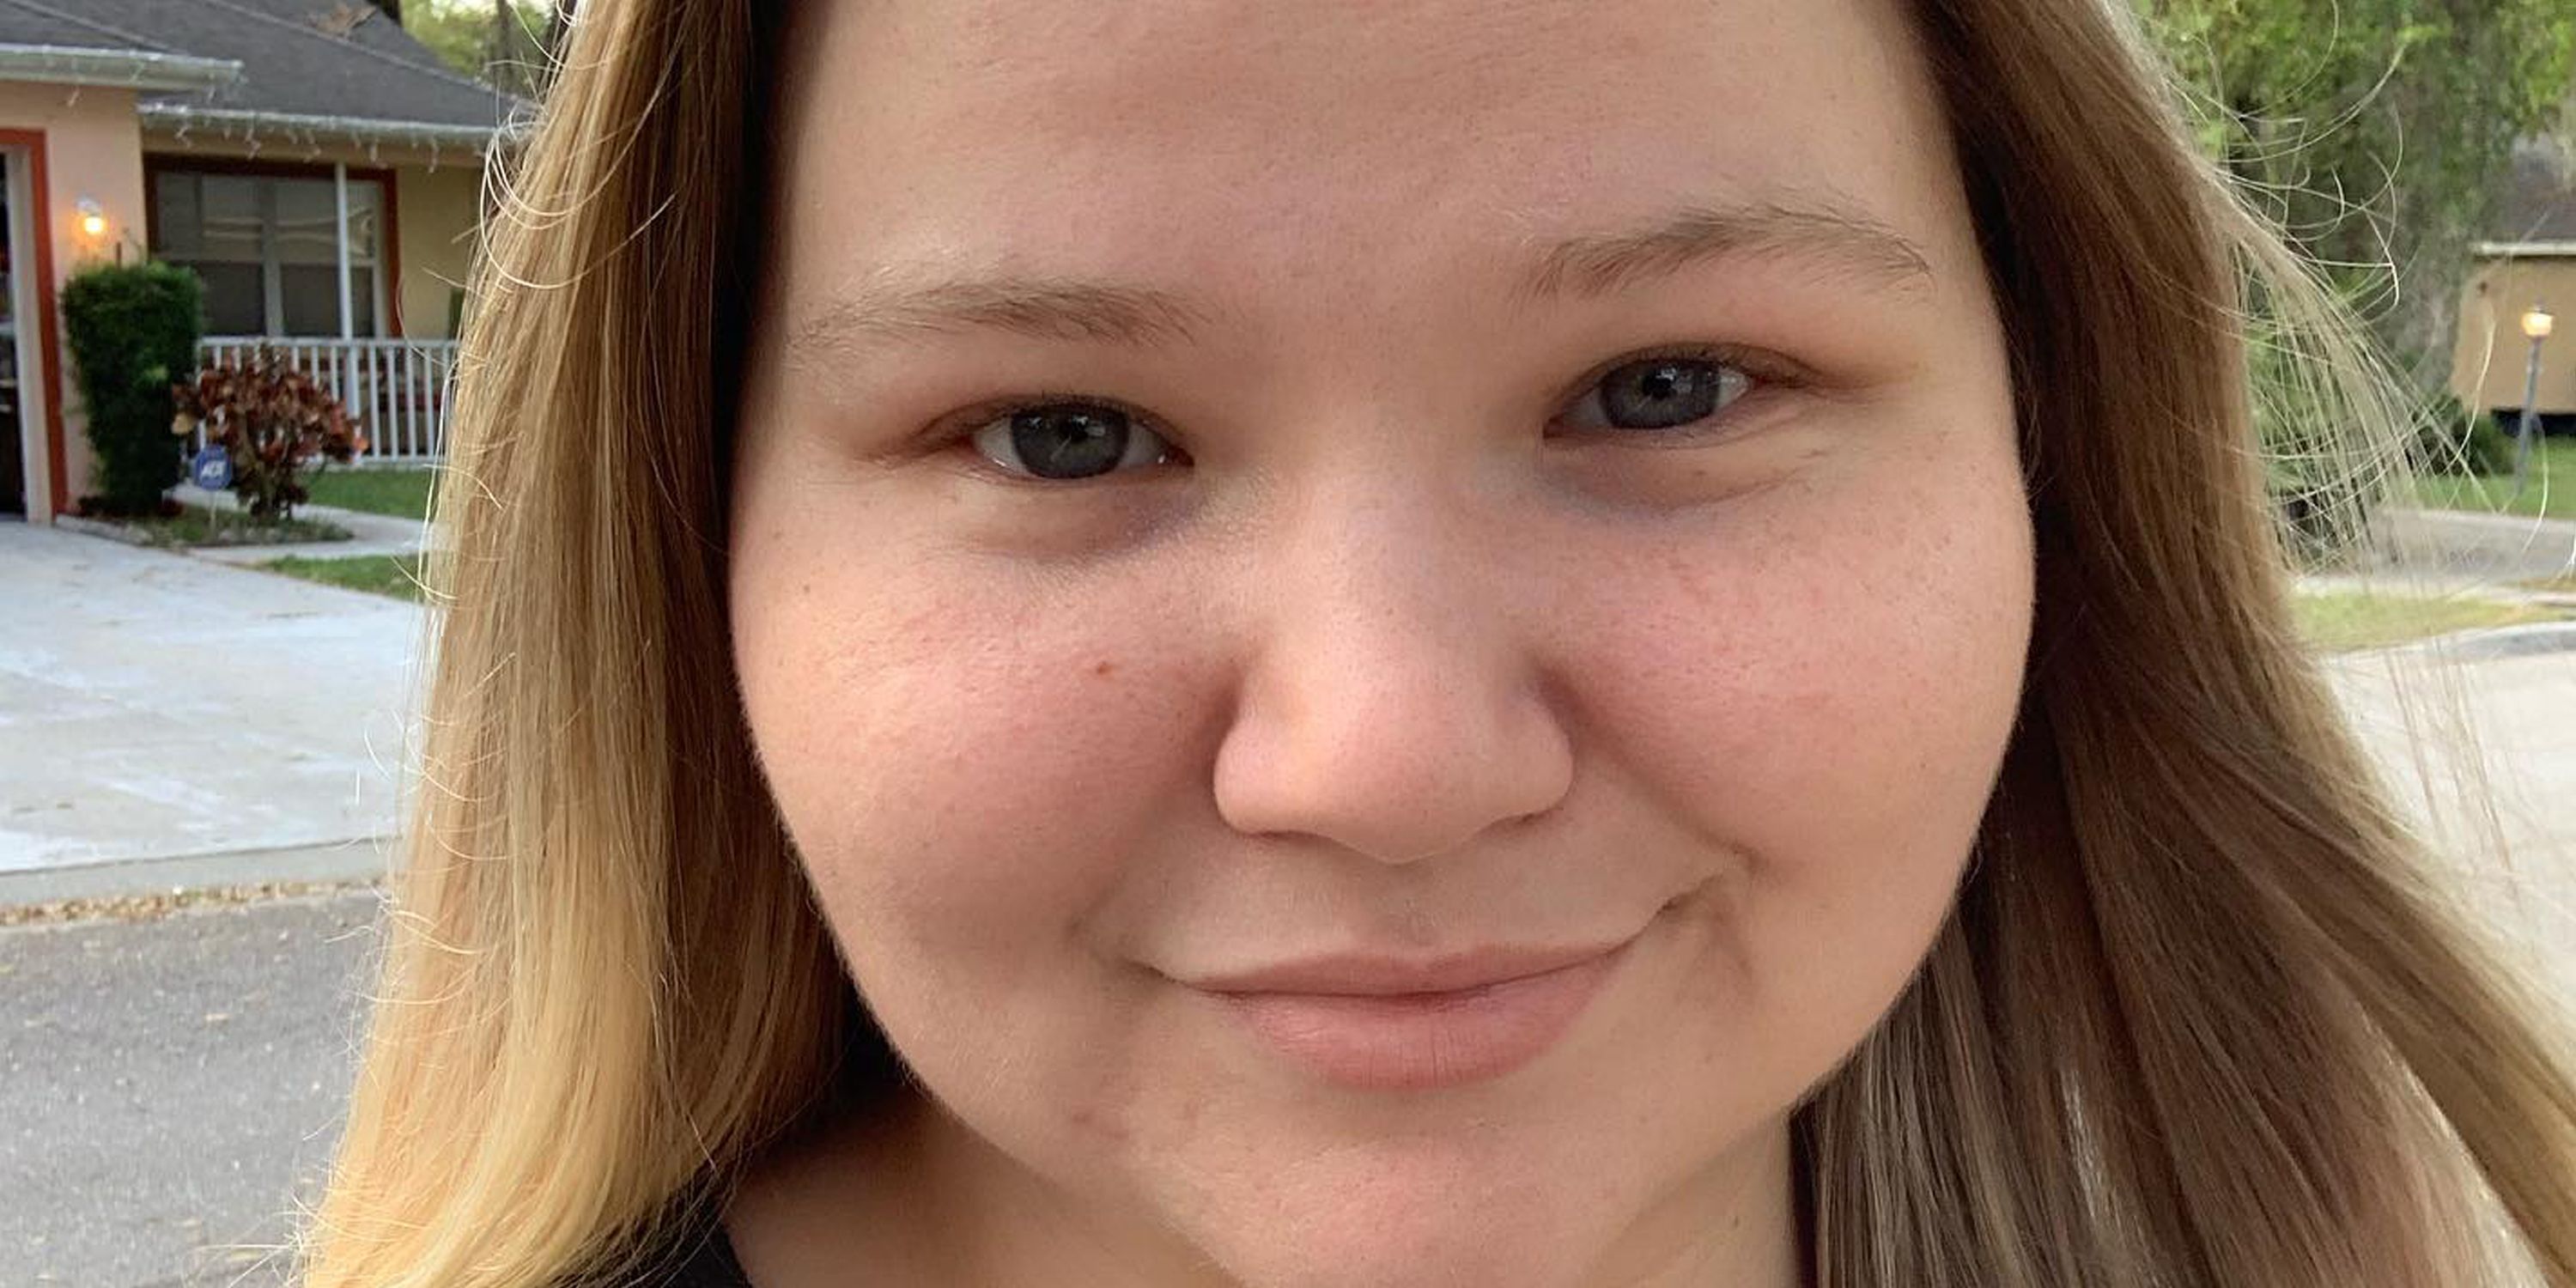 Nicole Nafziger Selfie from 90 Day Fiance smiling slightly